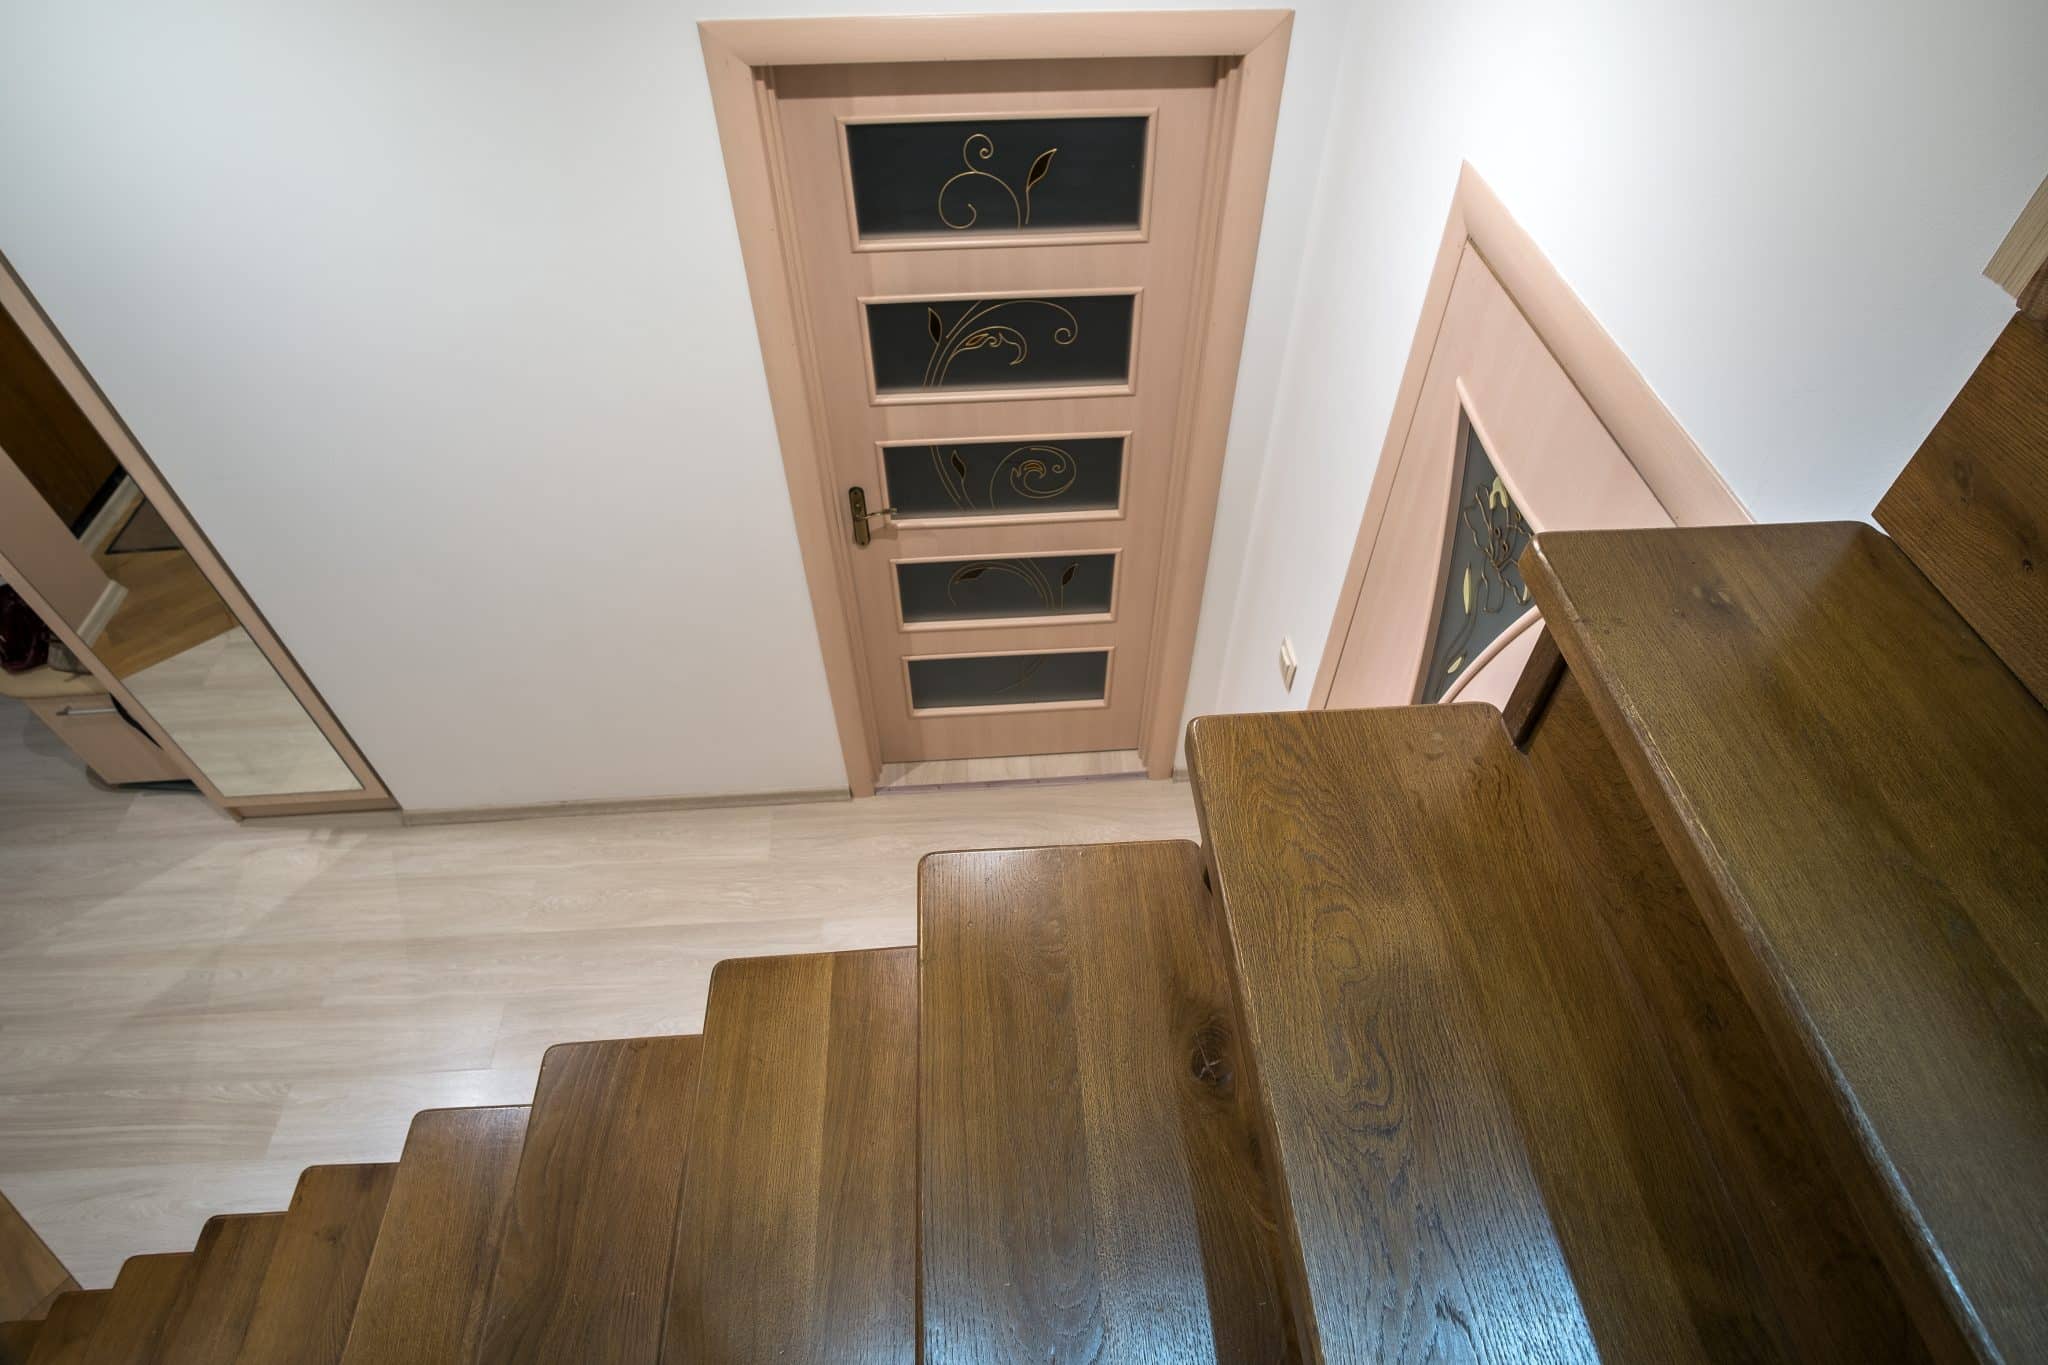 A light color wood floor stain while the stairs are stained a darker color